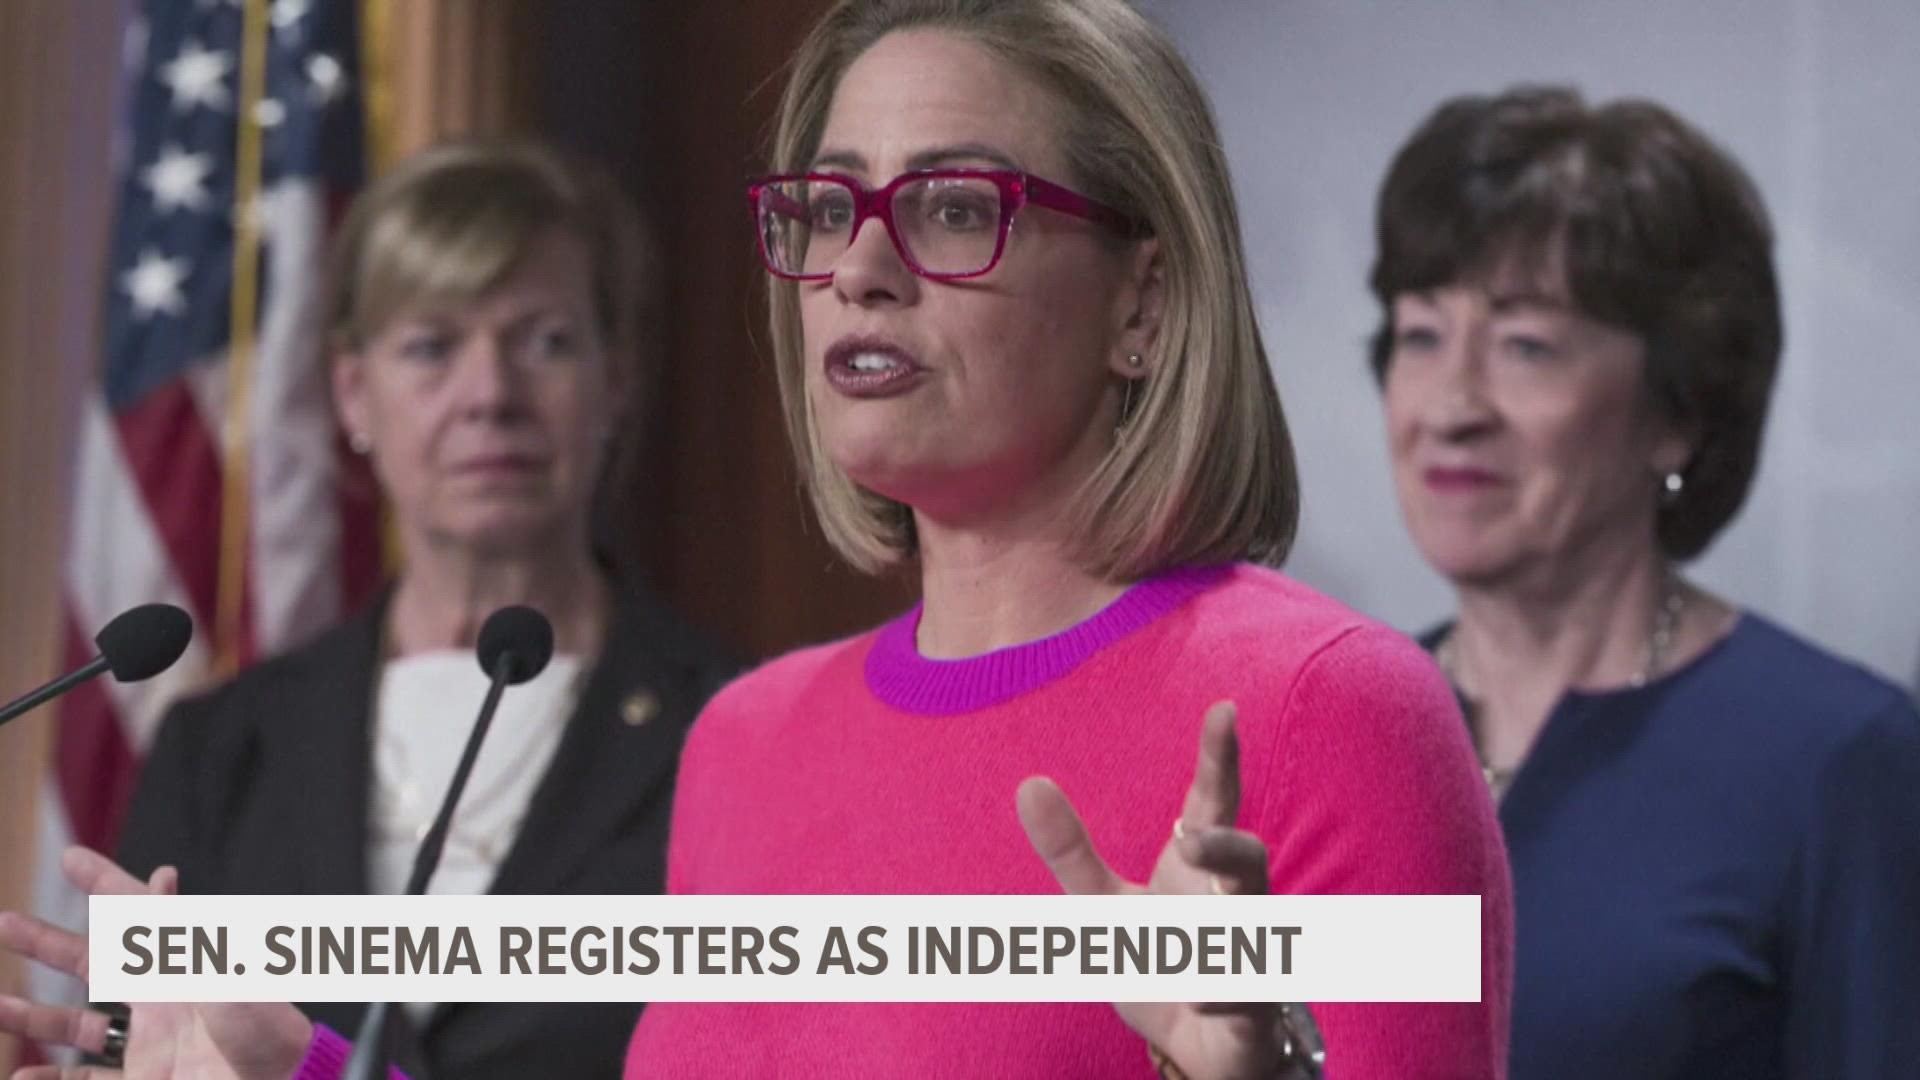 Despite no longer being a Democrat, Sinema said she wouldn't caucus with the Republicans, maintaining Democratic senate control.